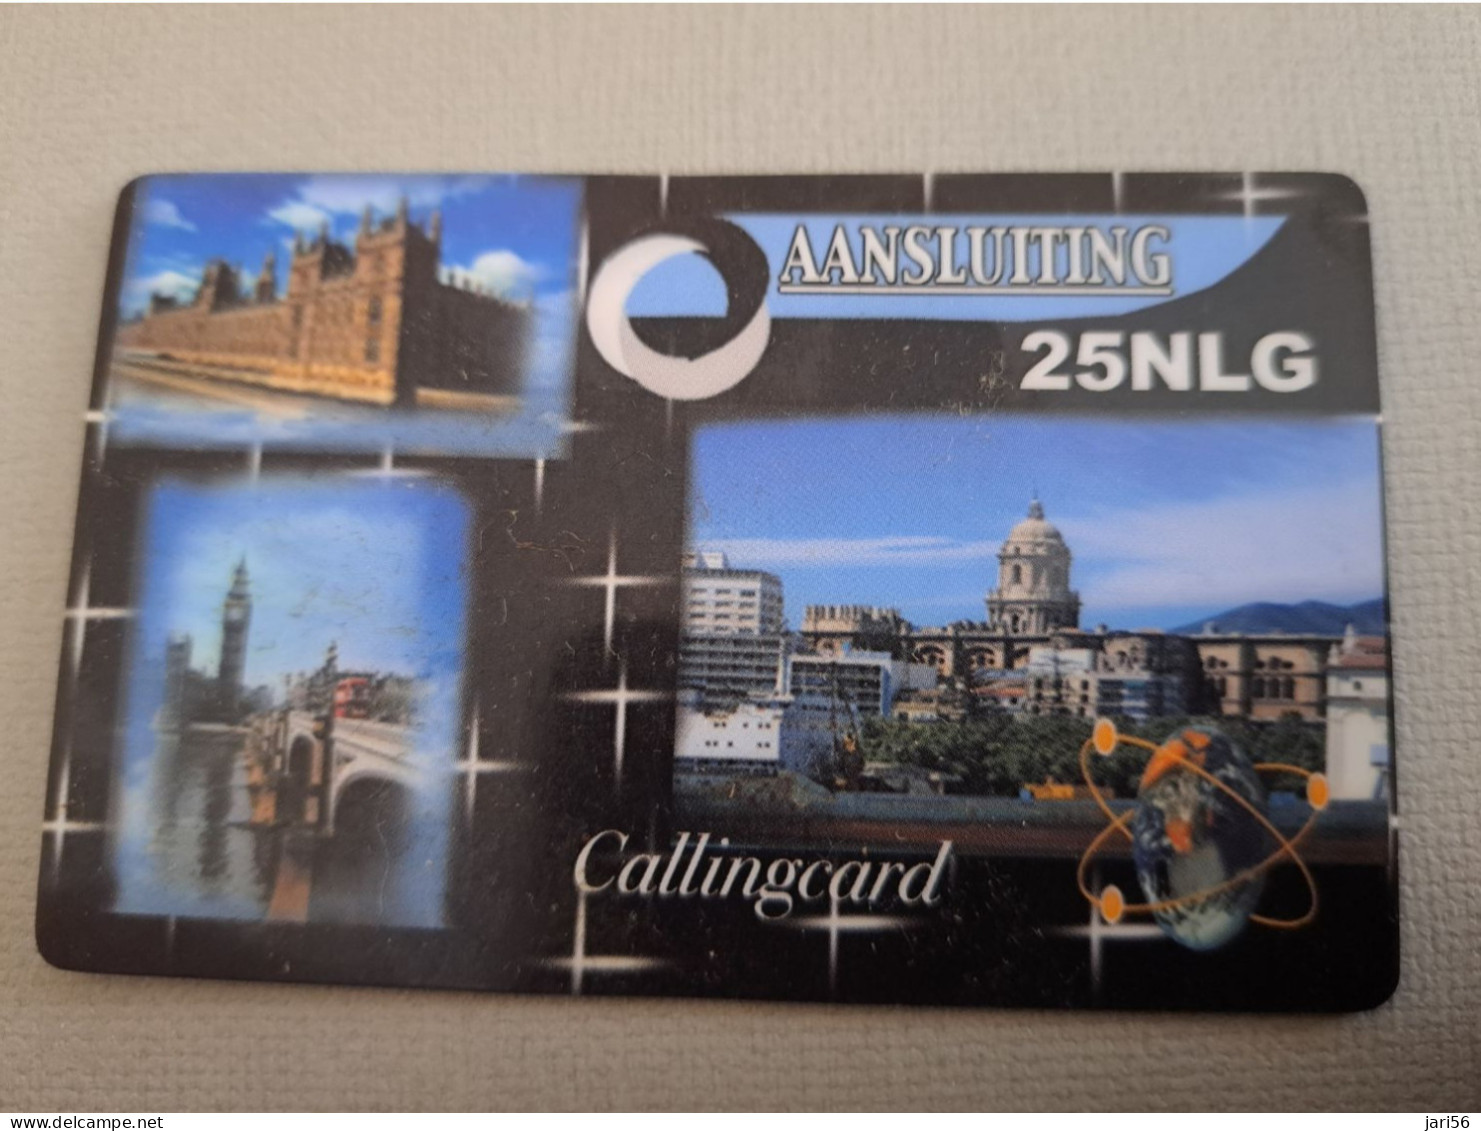 NETHERLANDS /  PREPAID /  AANSLUITING CALLINGCARD/ CONNECTING WEB & PHONE  /      HFL 25,-/  USED  ** 15286** - Privat